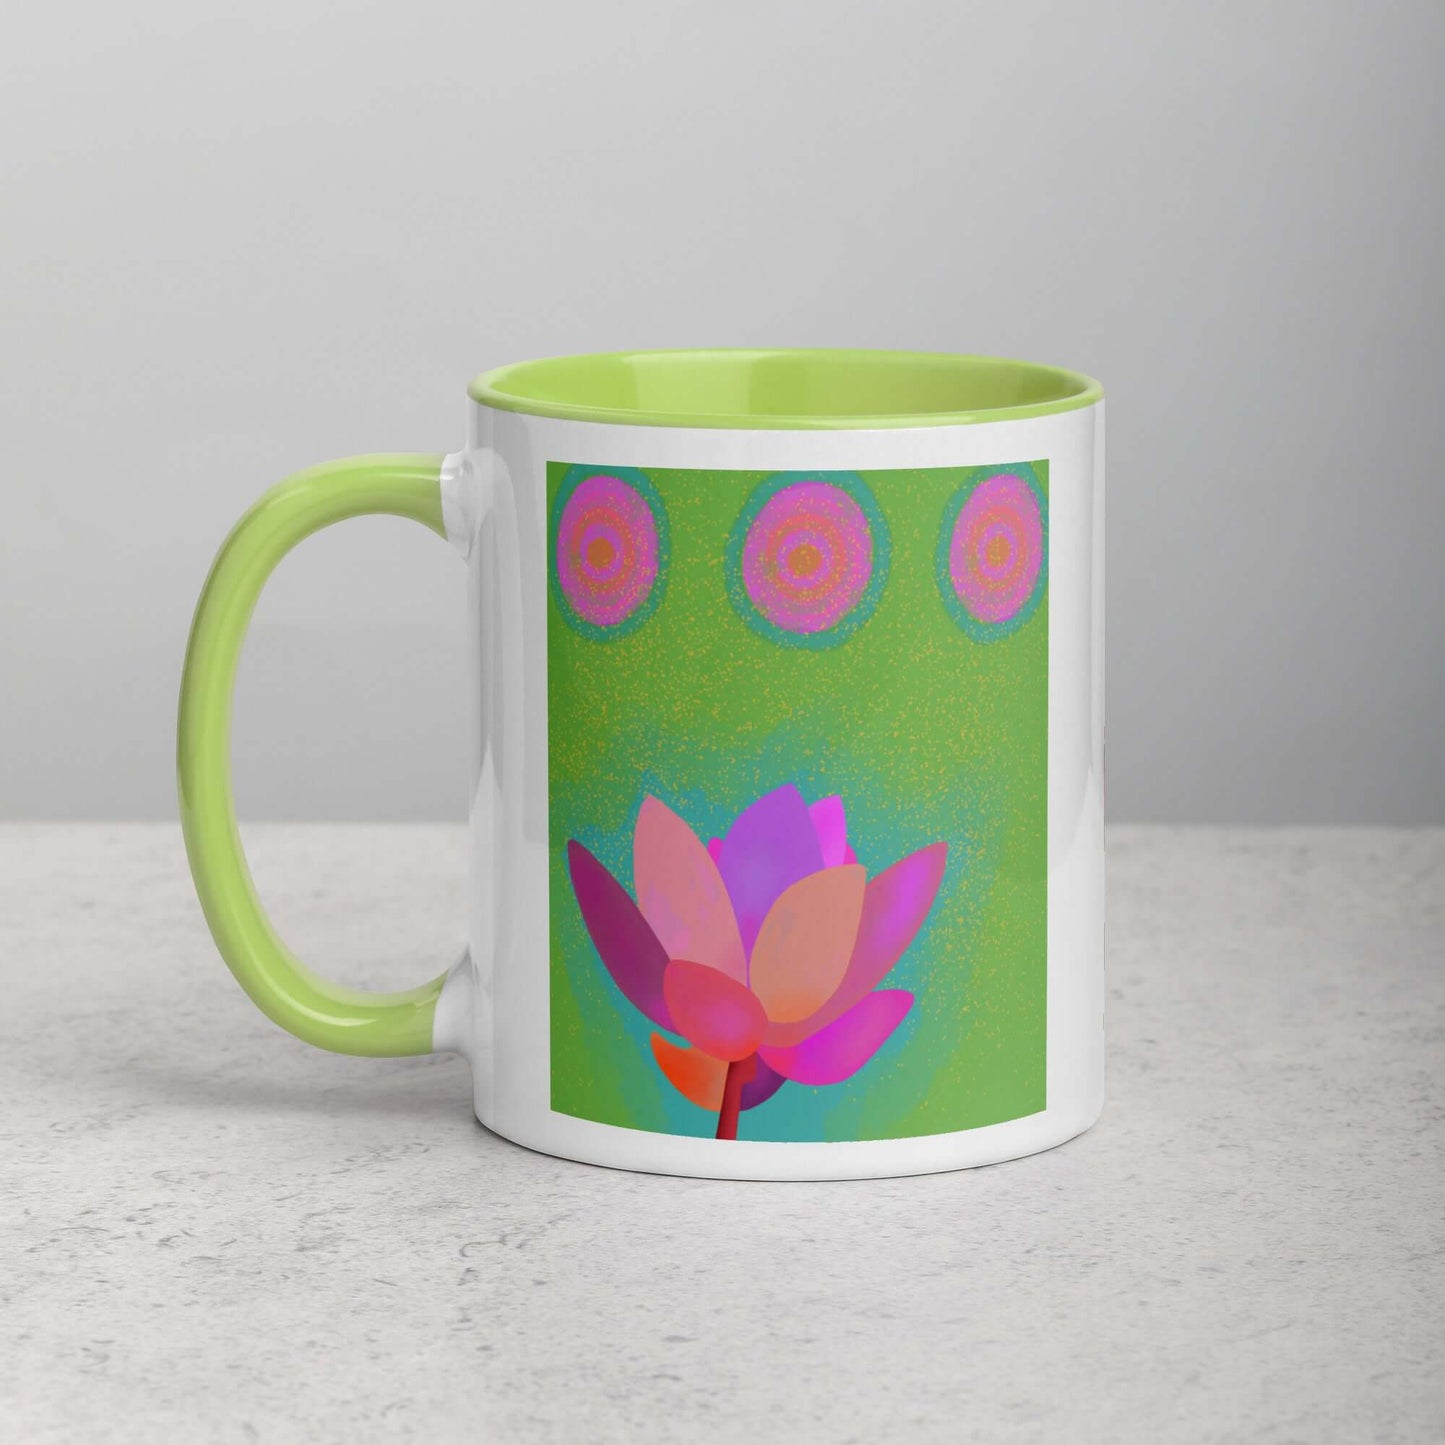 Pink Lotus Flower on Green Background “Lotus Dots” Mug with Lime Green Color Inside Left Handed Front View